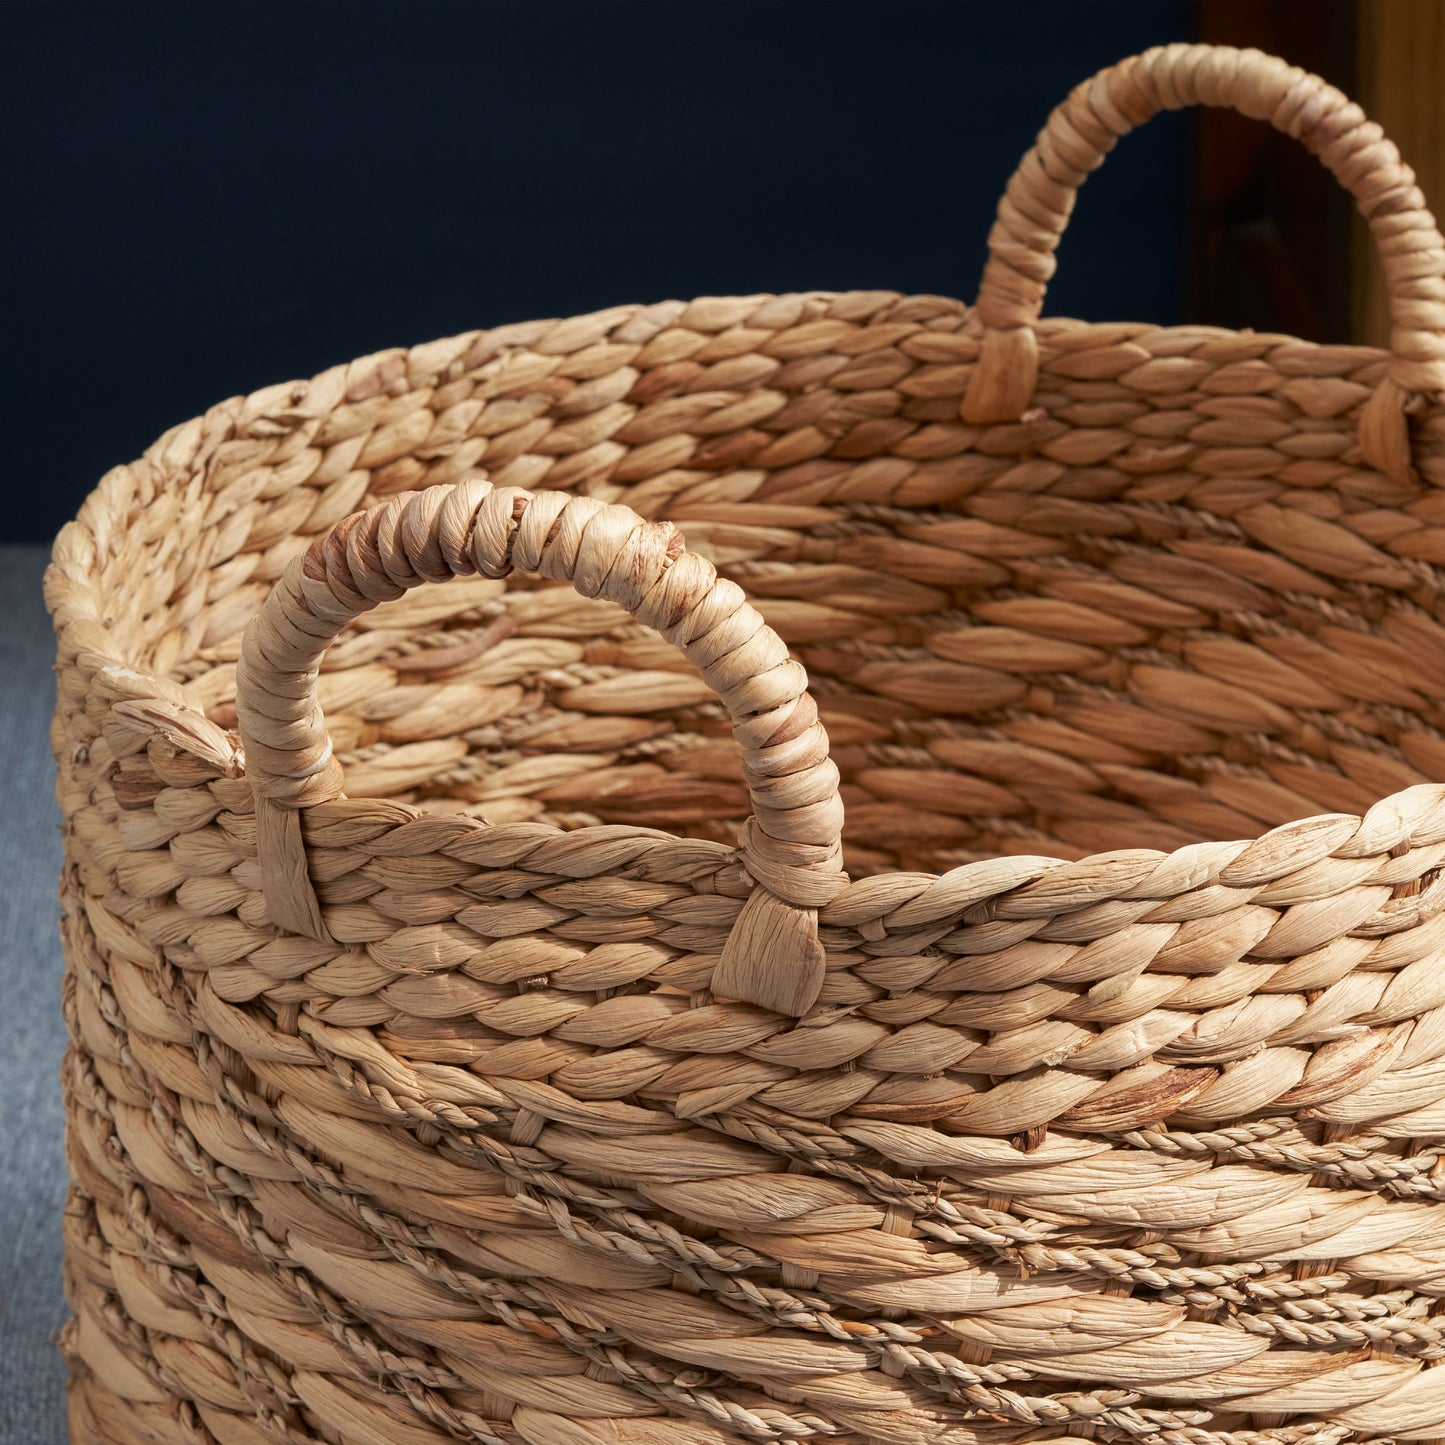 Isador Seagrass Basket with Handles - 15" x 15" x 15"